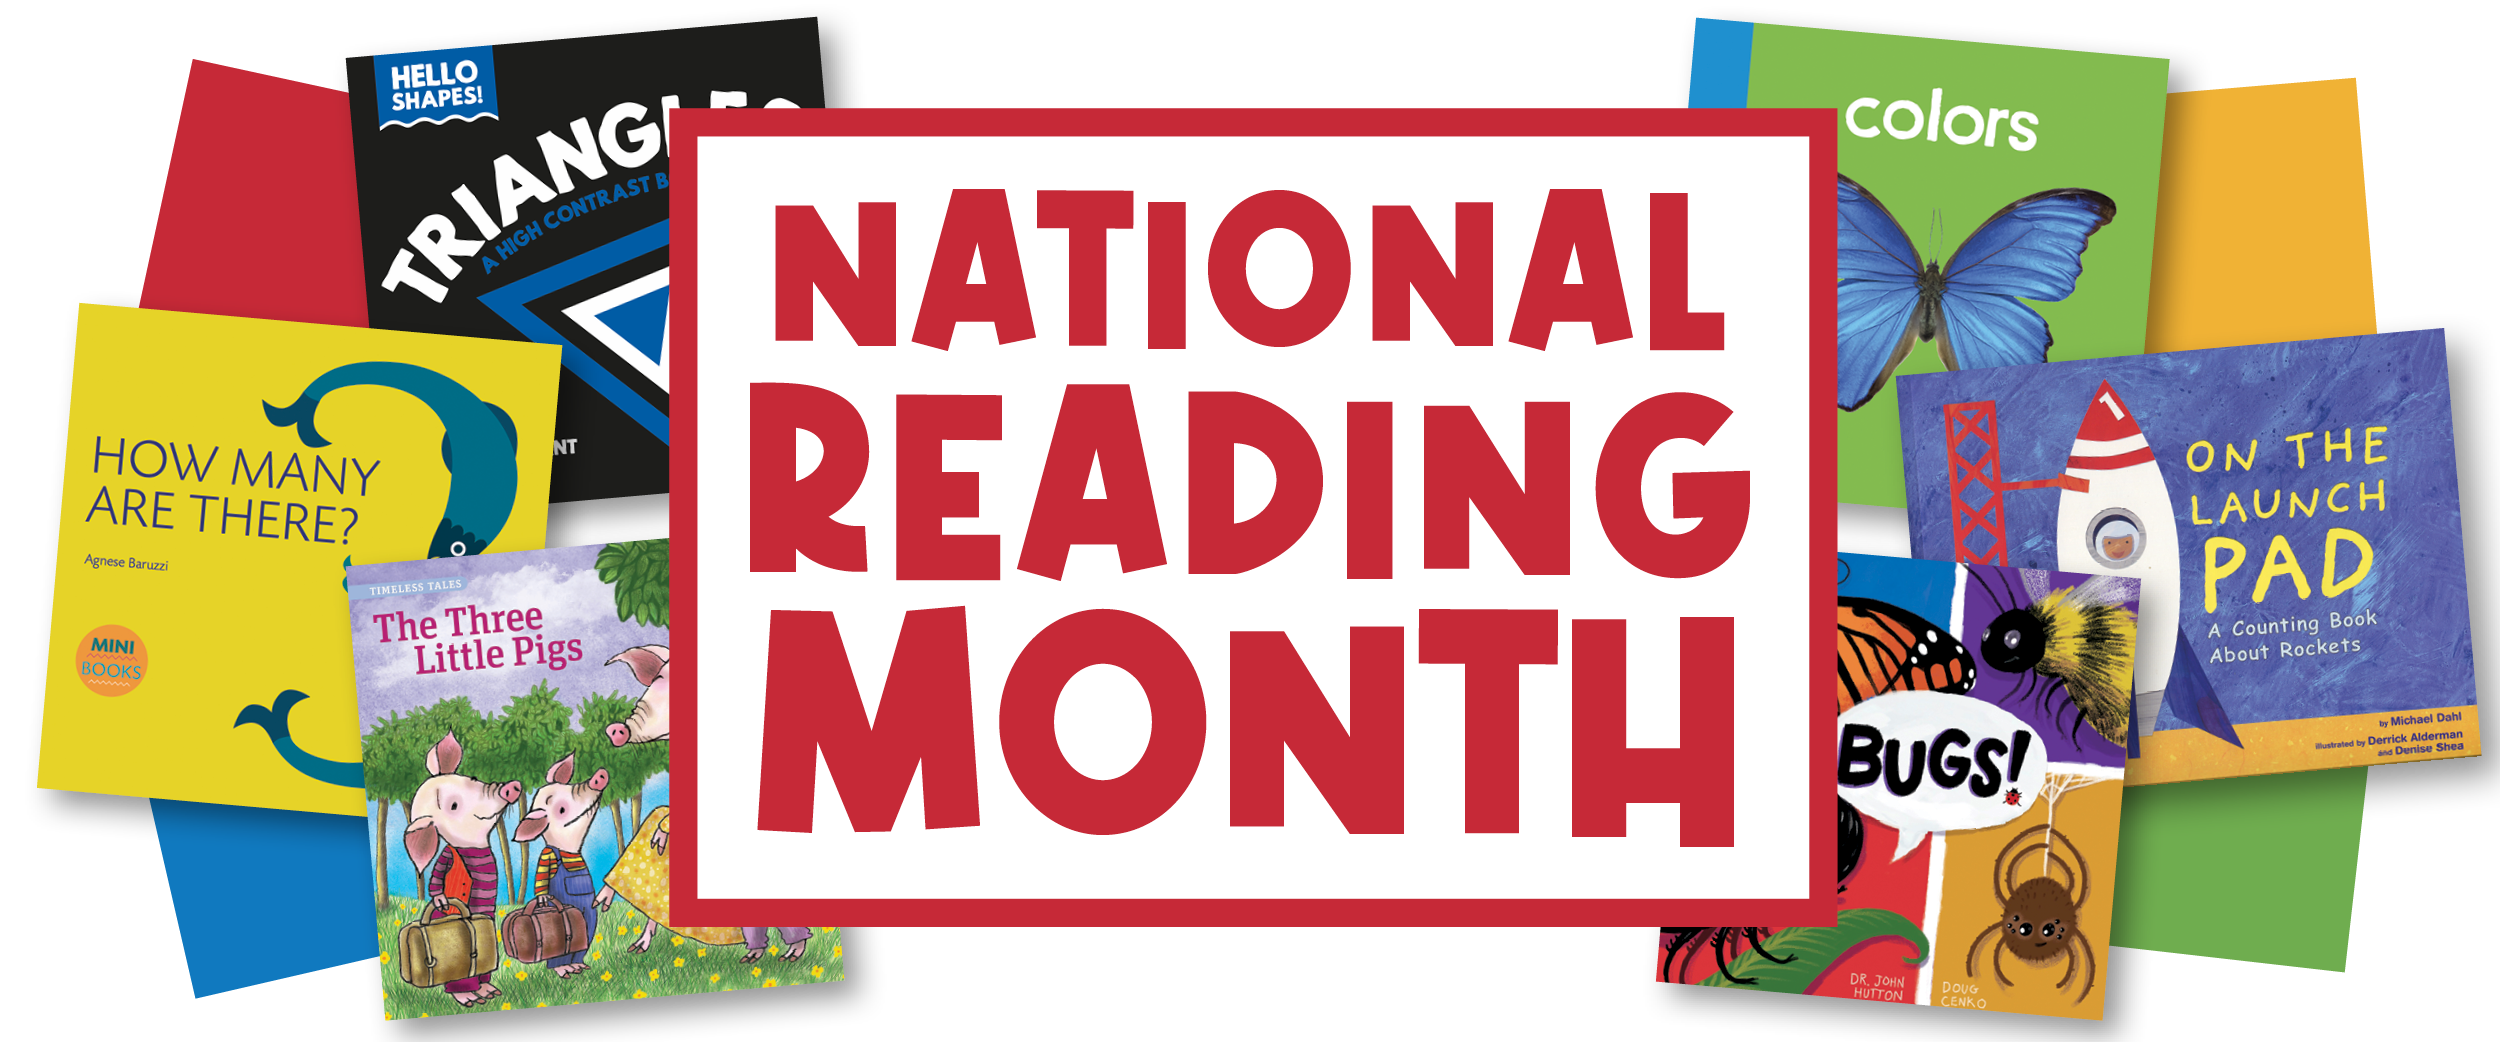 National Reading Month & the Importance of Reading